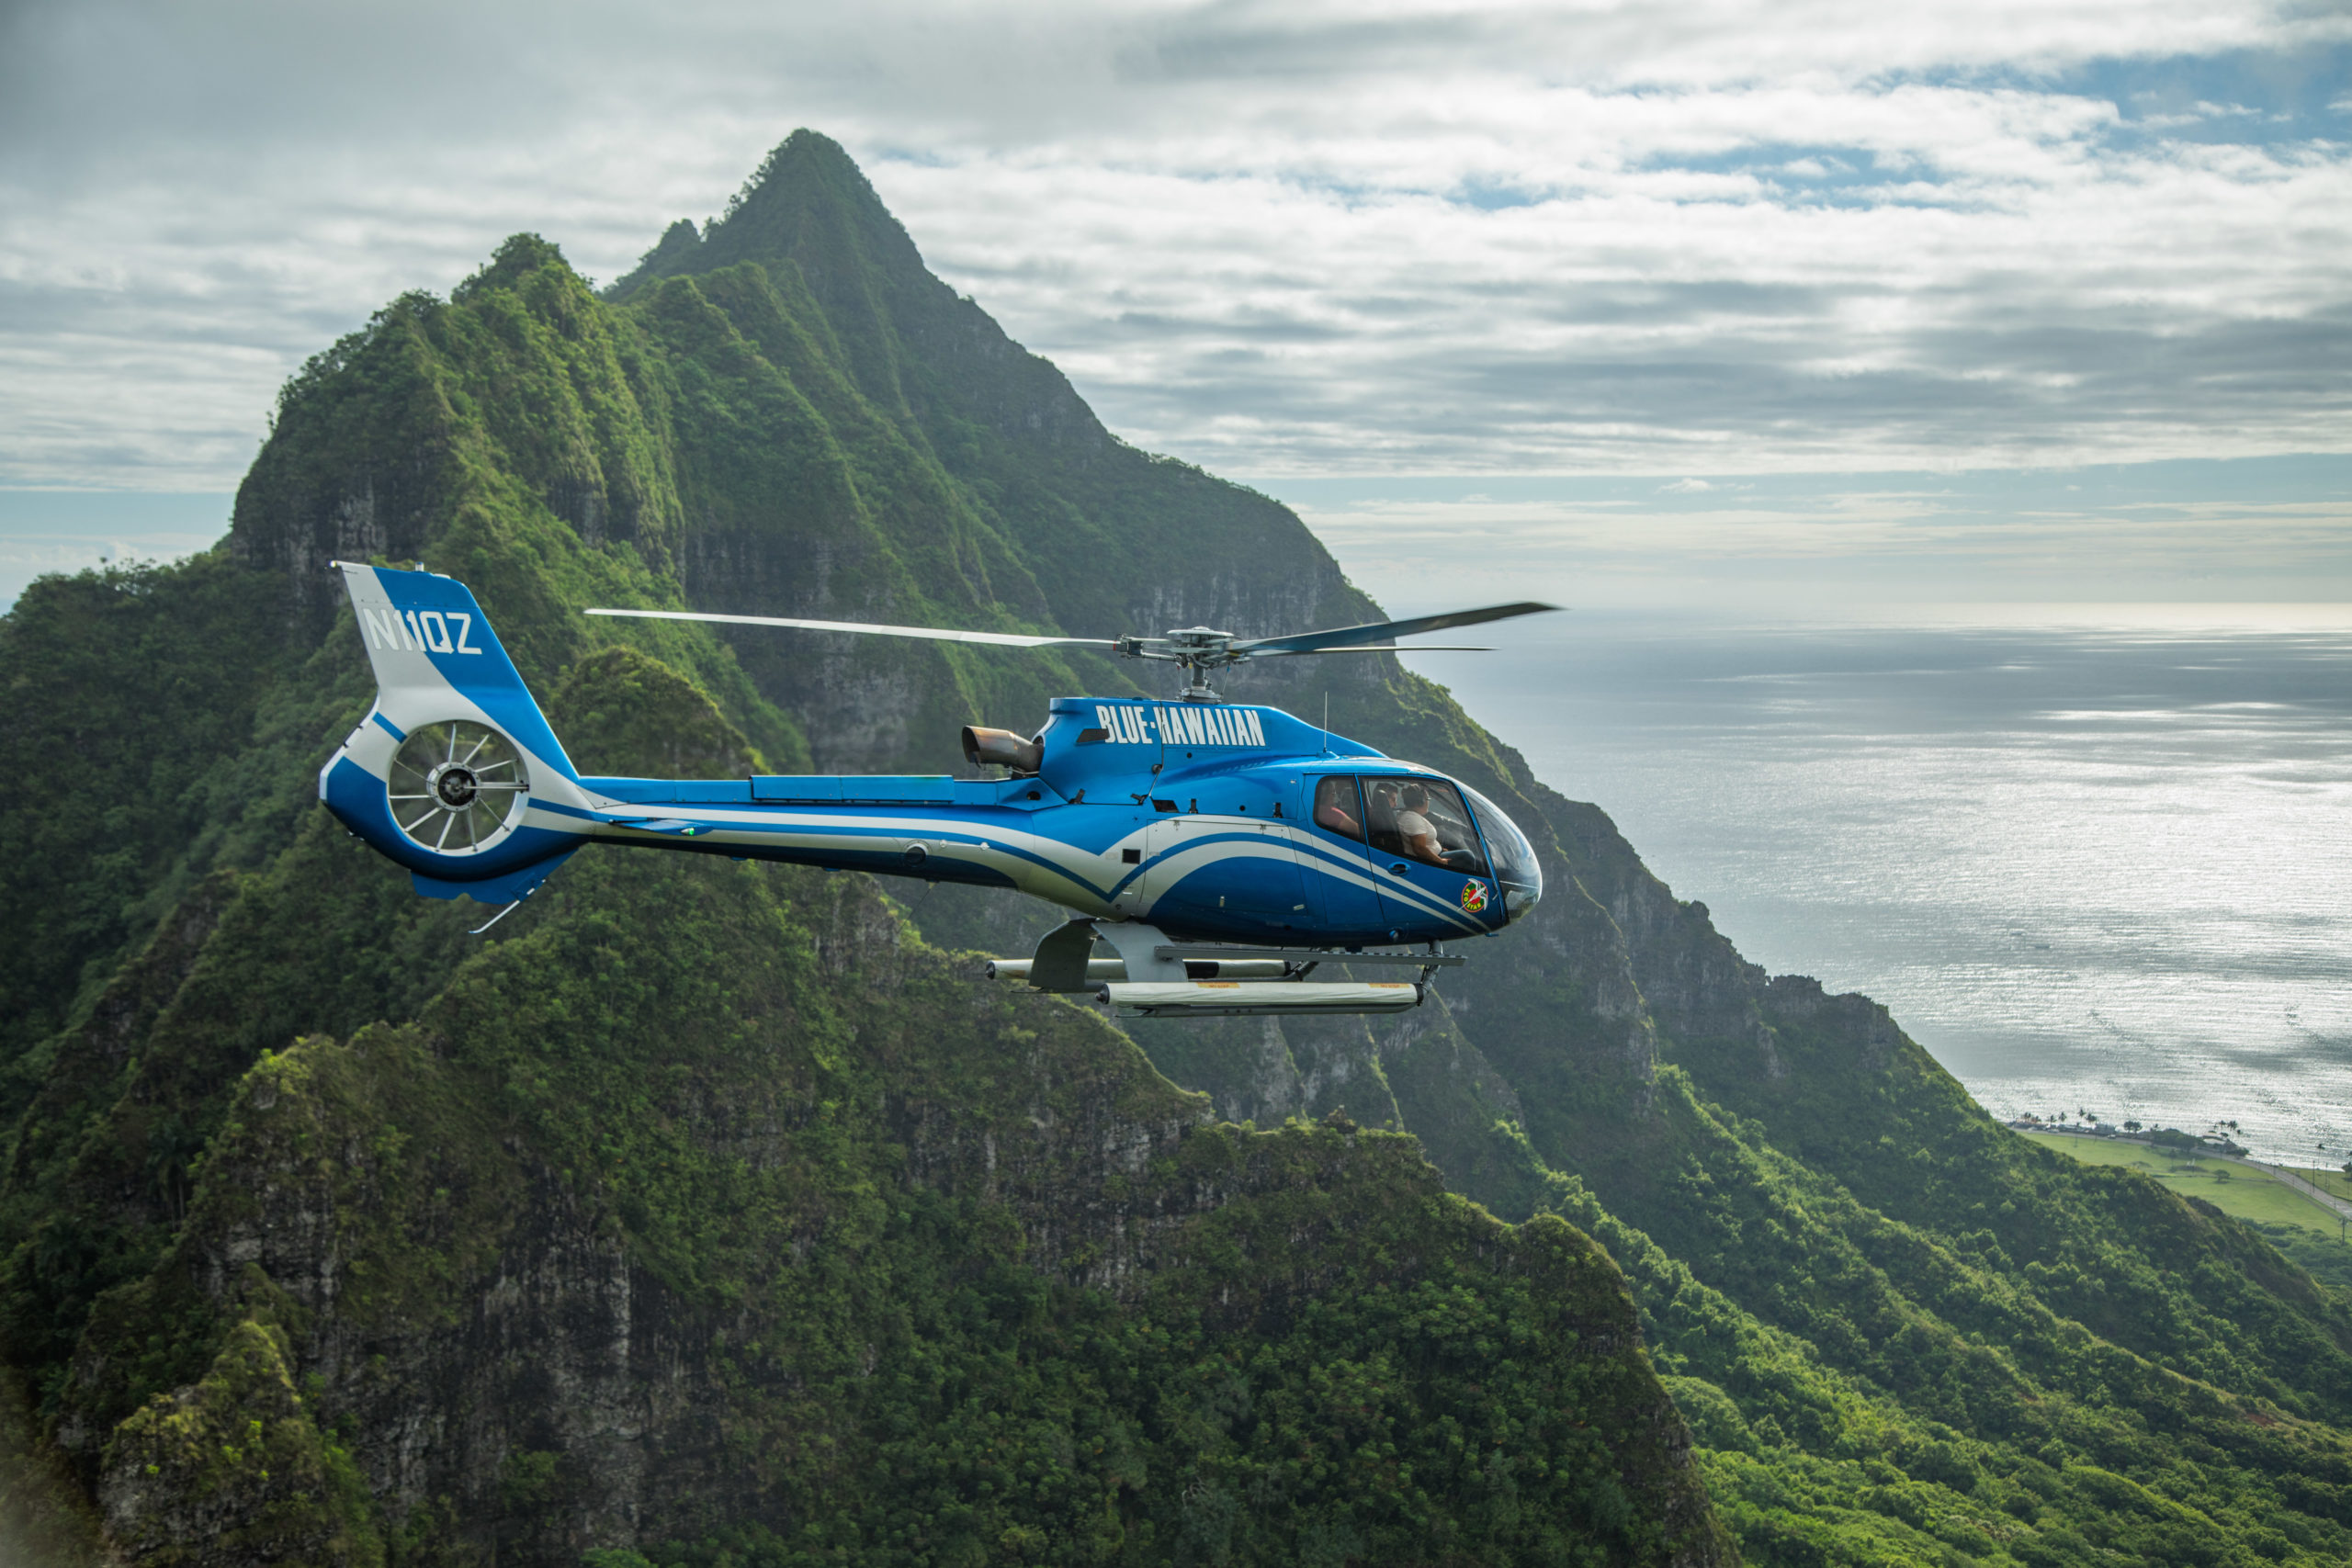 Blue Hawaiian Helicopters has been Hawaii’s air-tour leader for over 38 years, and the only helicopter tour company that serves the entire state